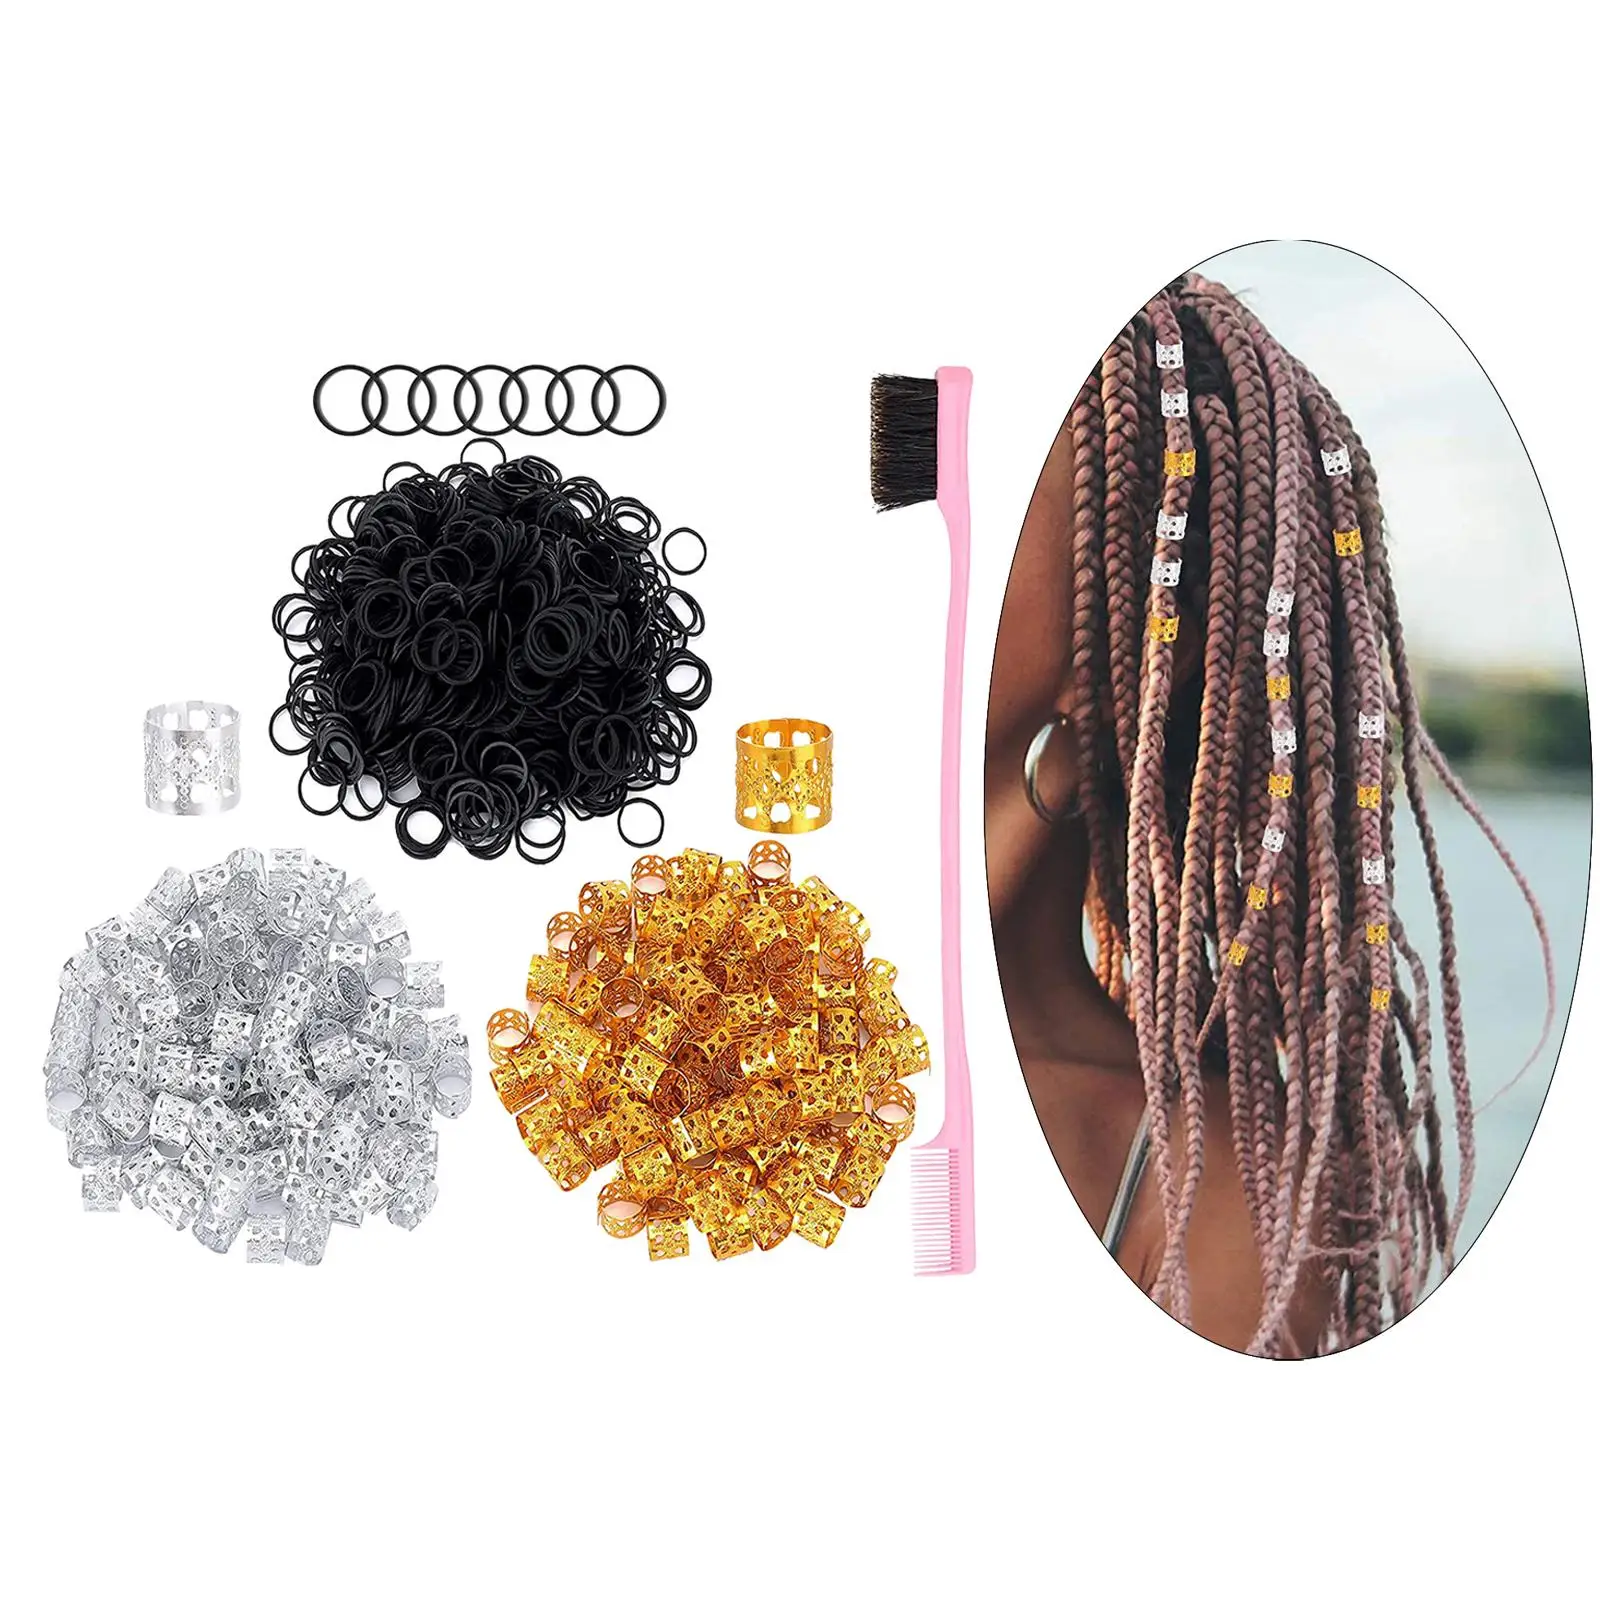 1201 Pieces  Beads, Metal Decoration Accessory, with Double-Ended Eyebrow Brush Jewelry Hair Braid Rings Clips for Braids Women